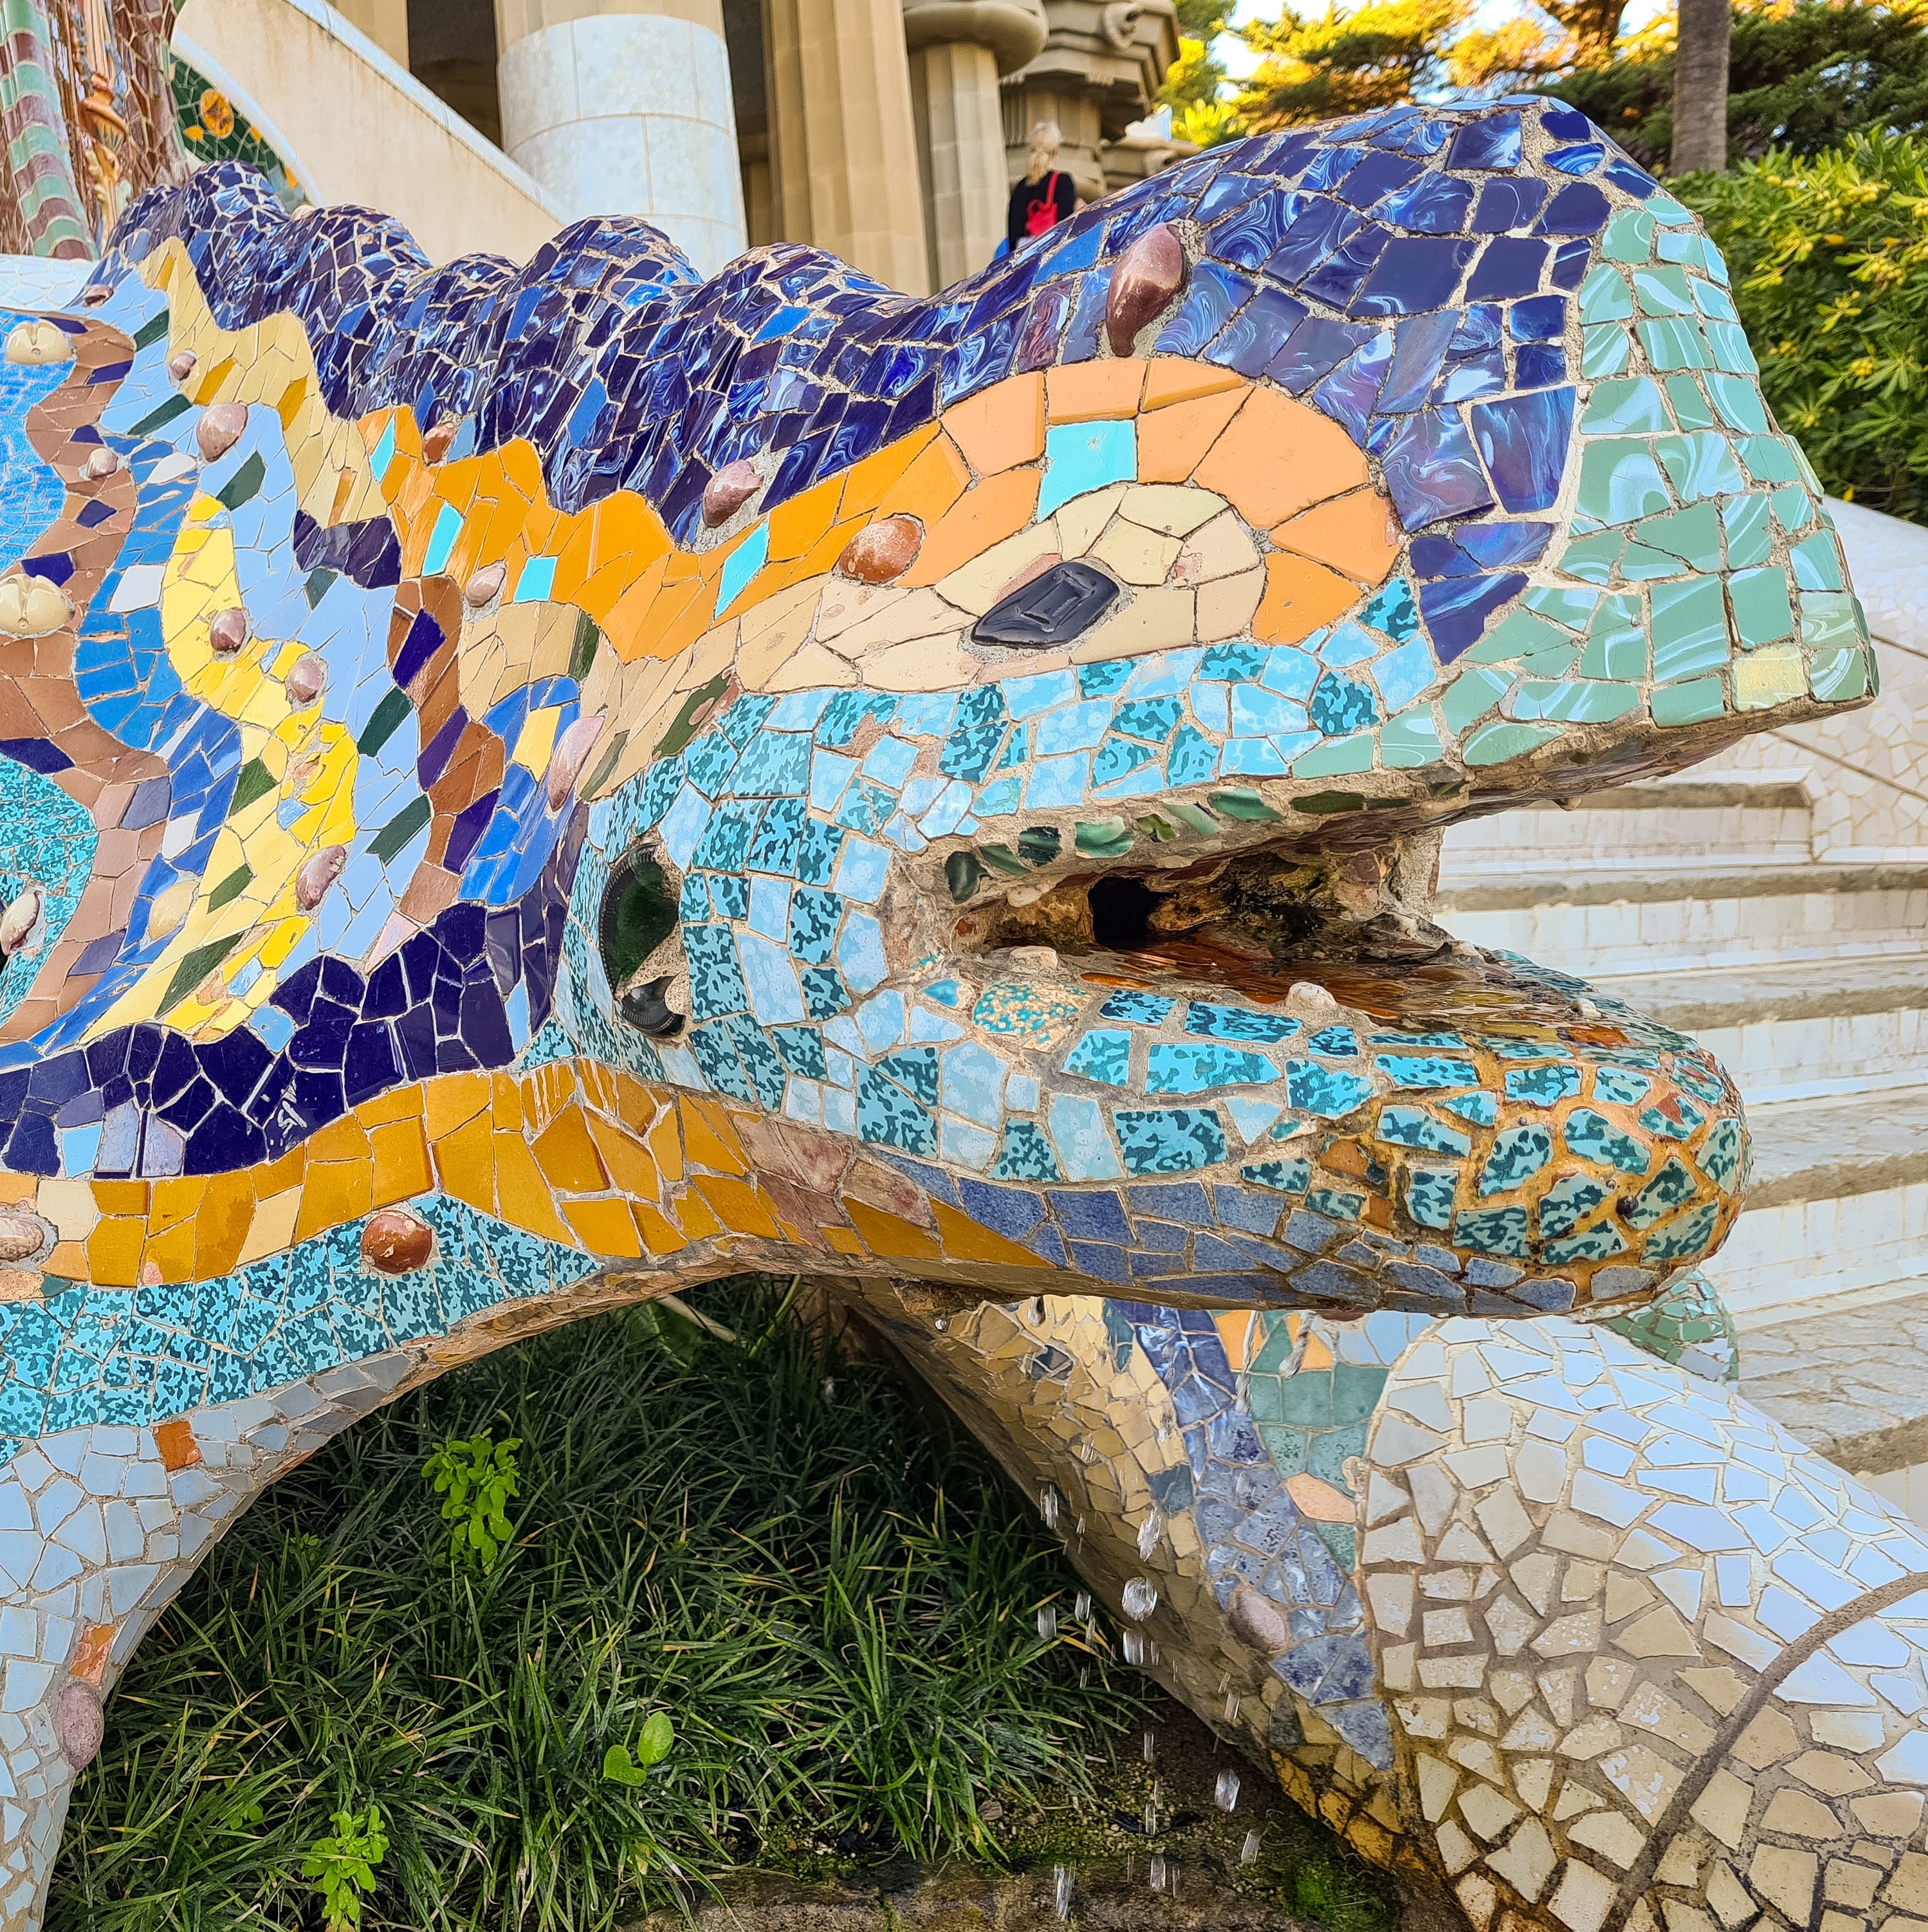 Dragon sculpture by Gaudi in Park Guell in Barcelona